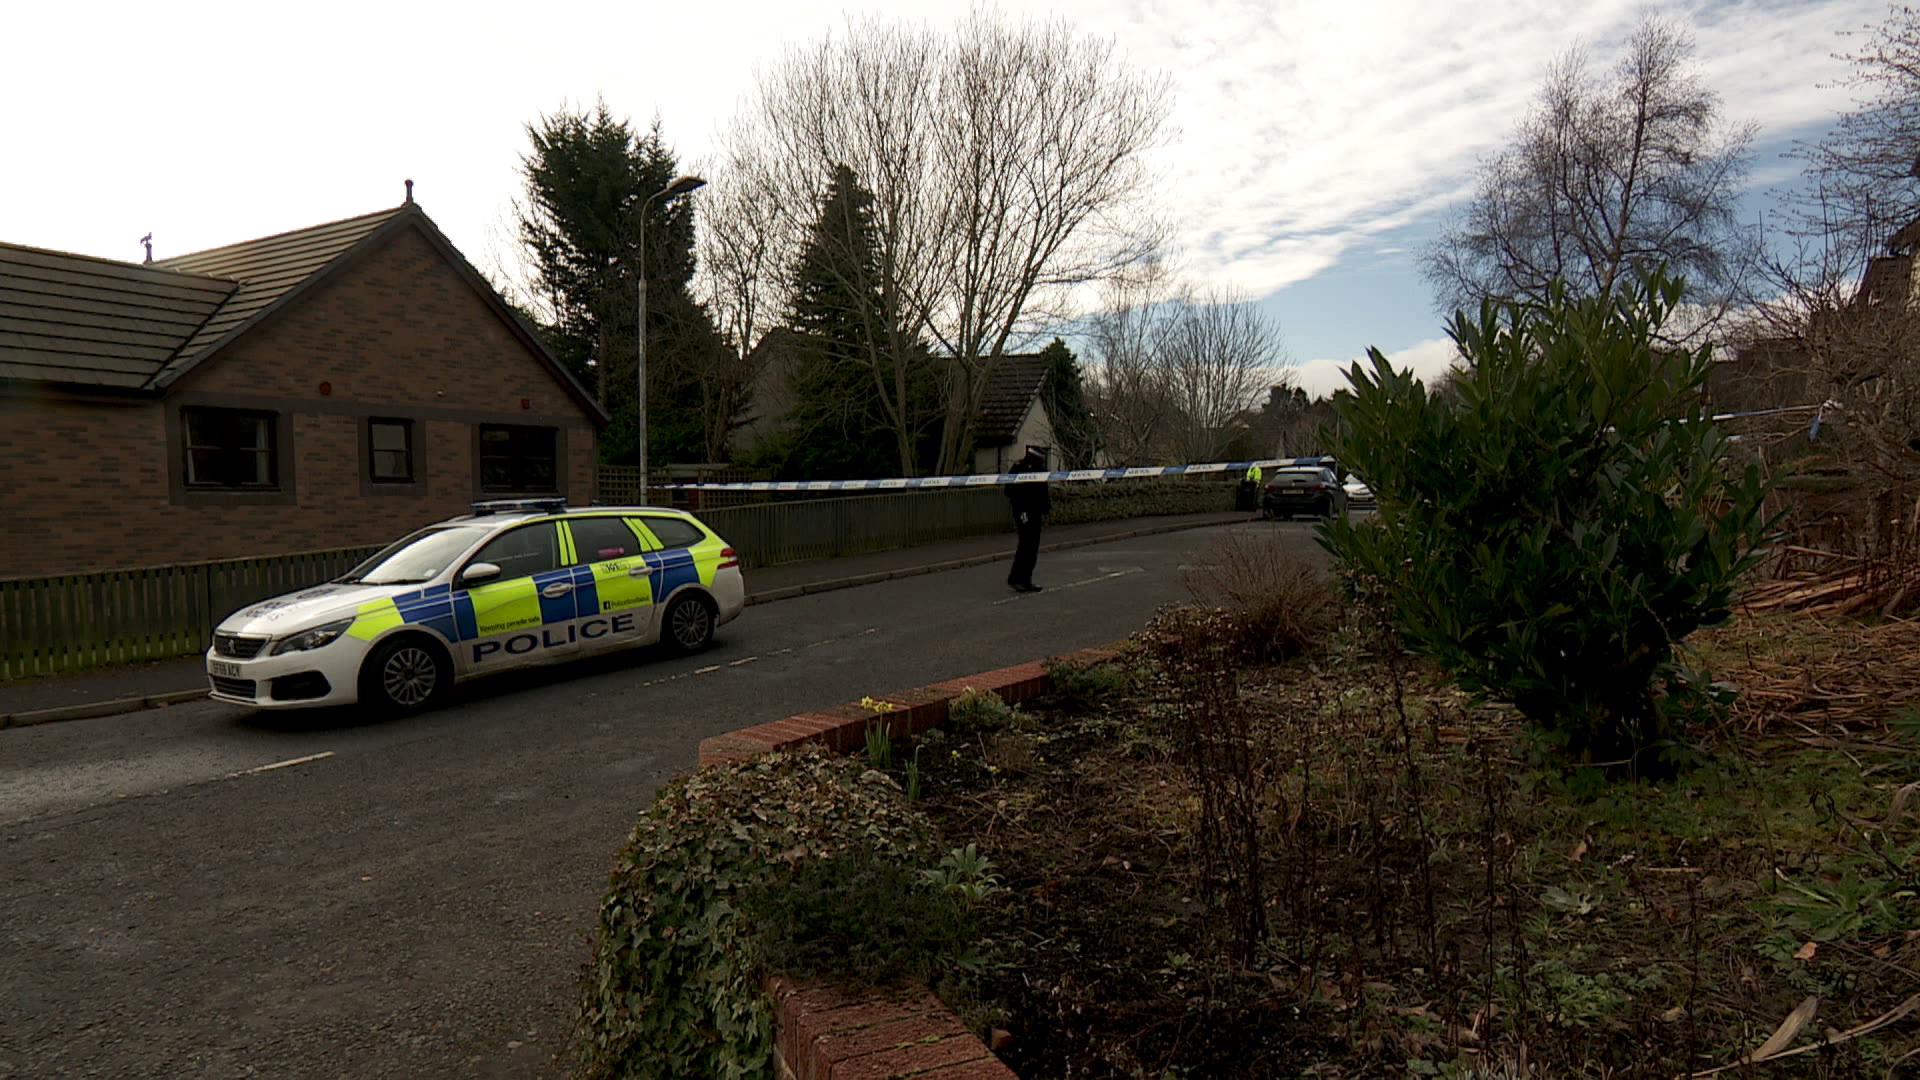 A police cordon was established around a home in Gattonside, a small village east of Galashiels town on the opposite side of the River Tweed to Melrose.